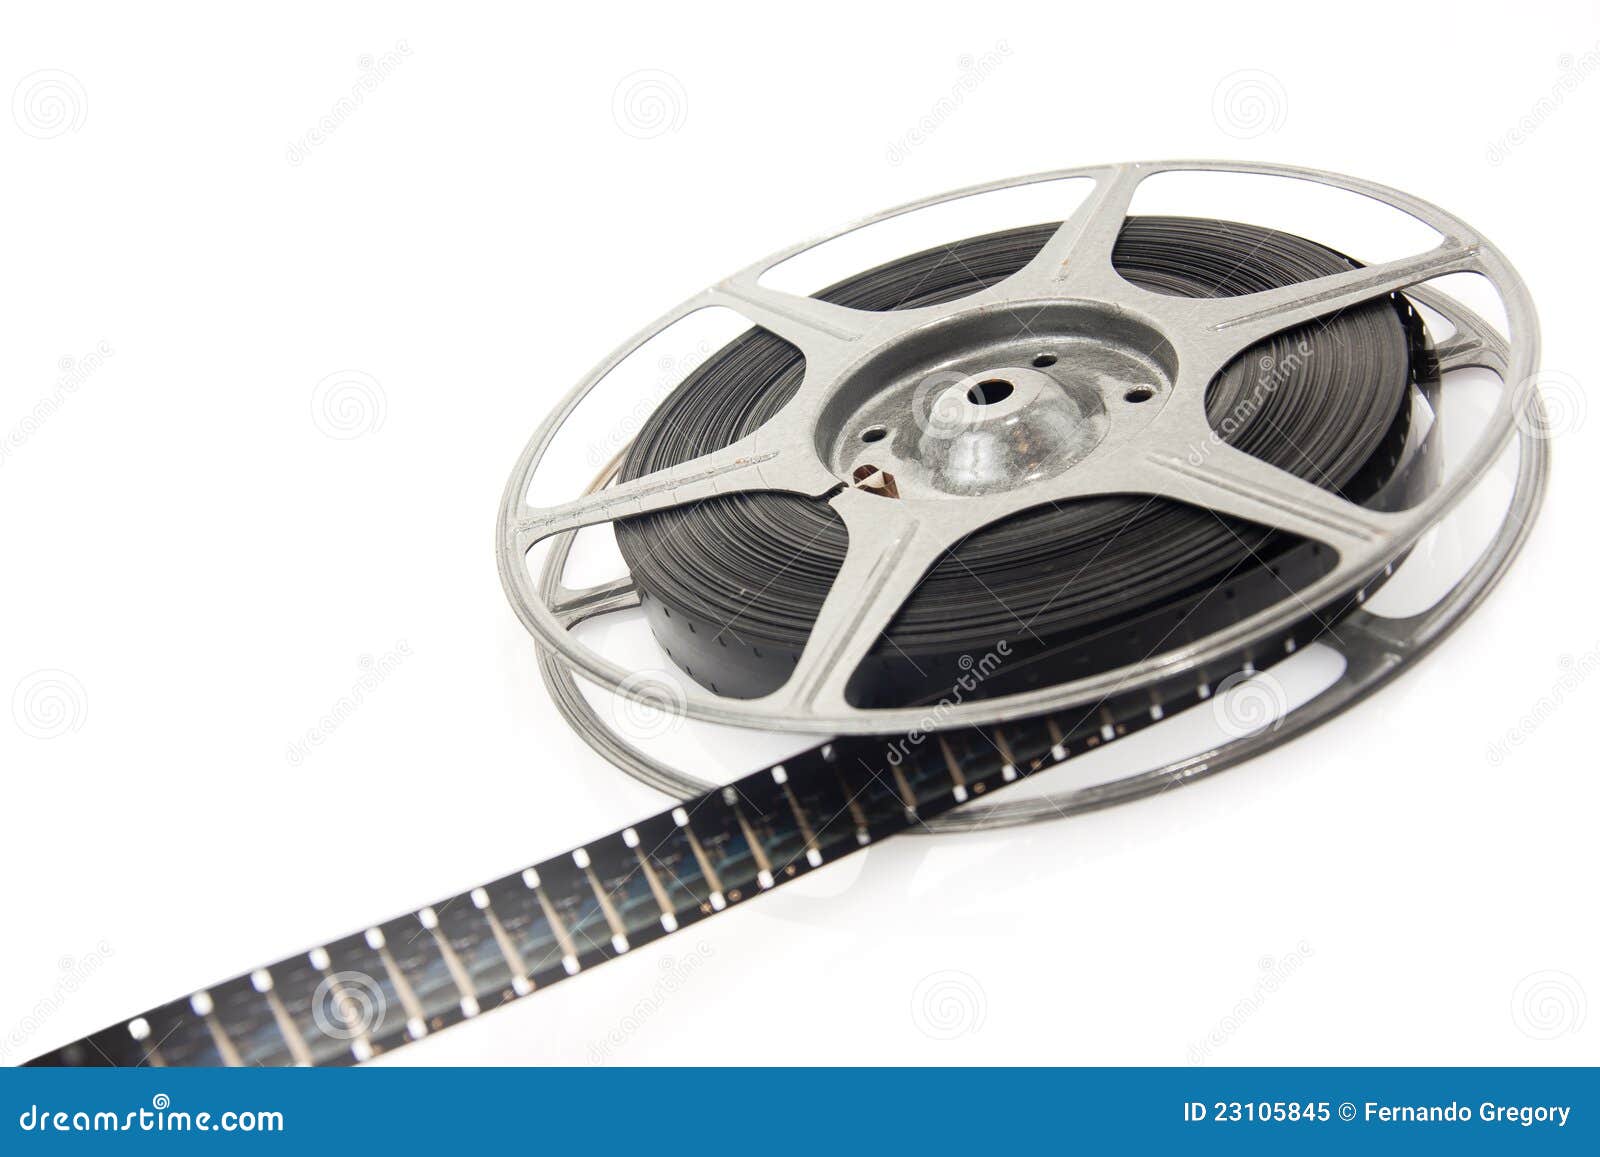 227 Can Film Movie Reel Stock Photos - Free & Royalty-Free Stock